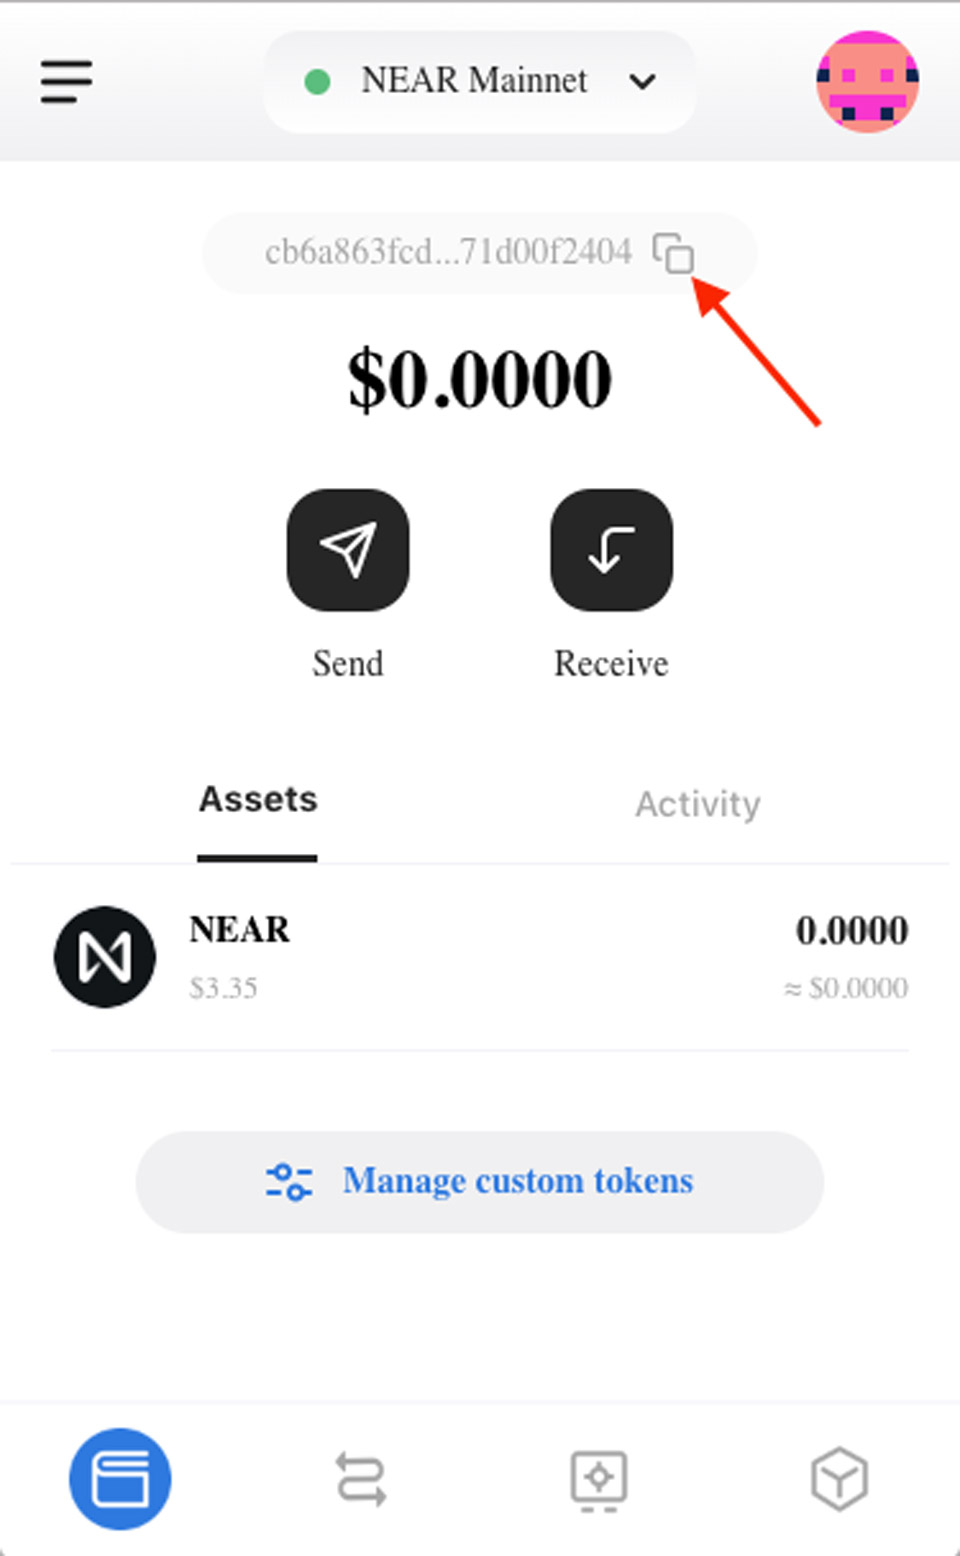 Get the wallet address to receive the token